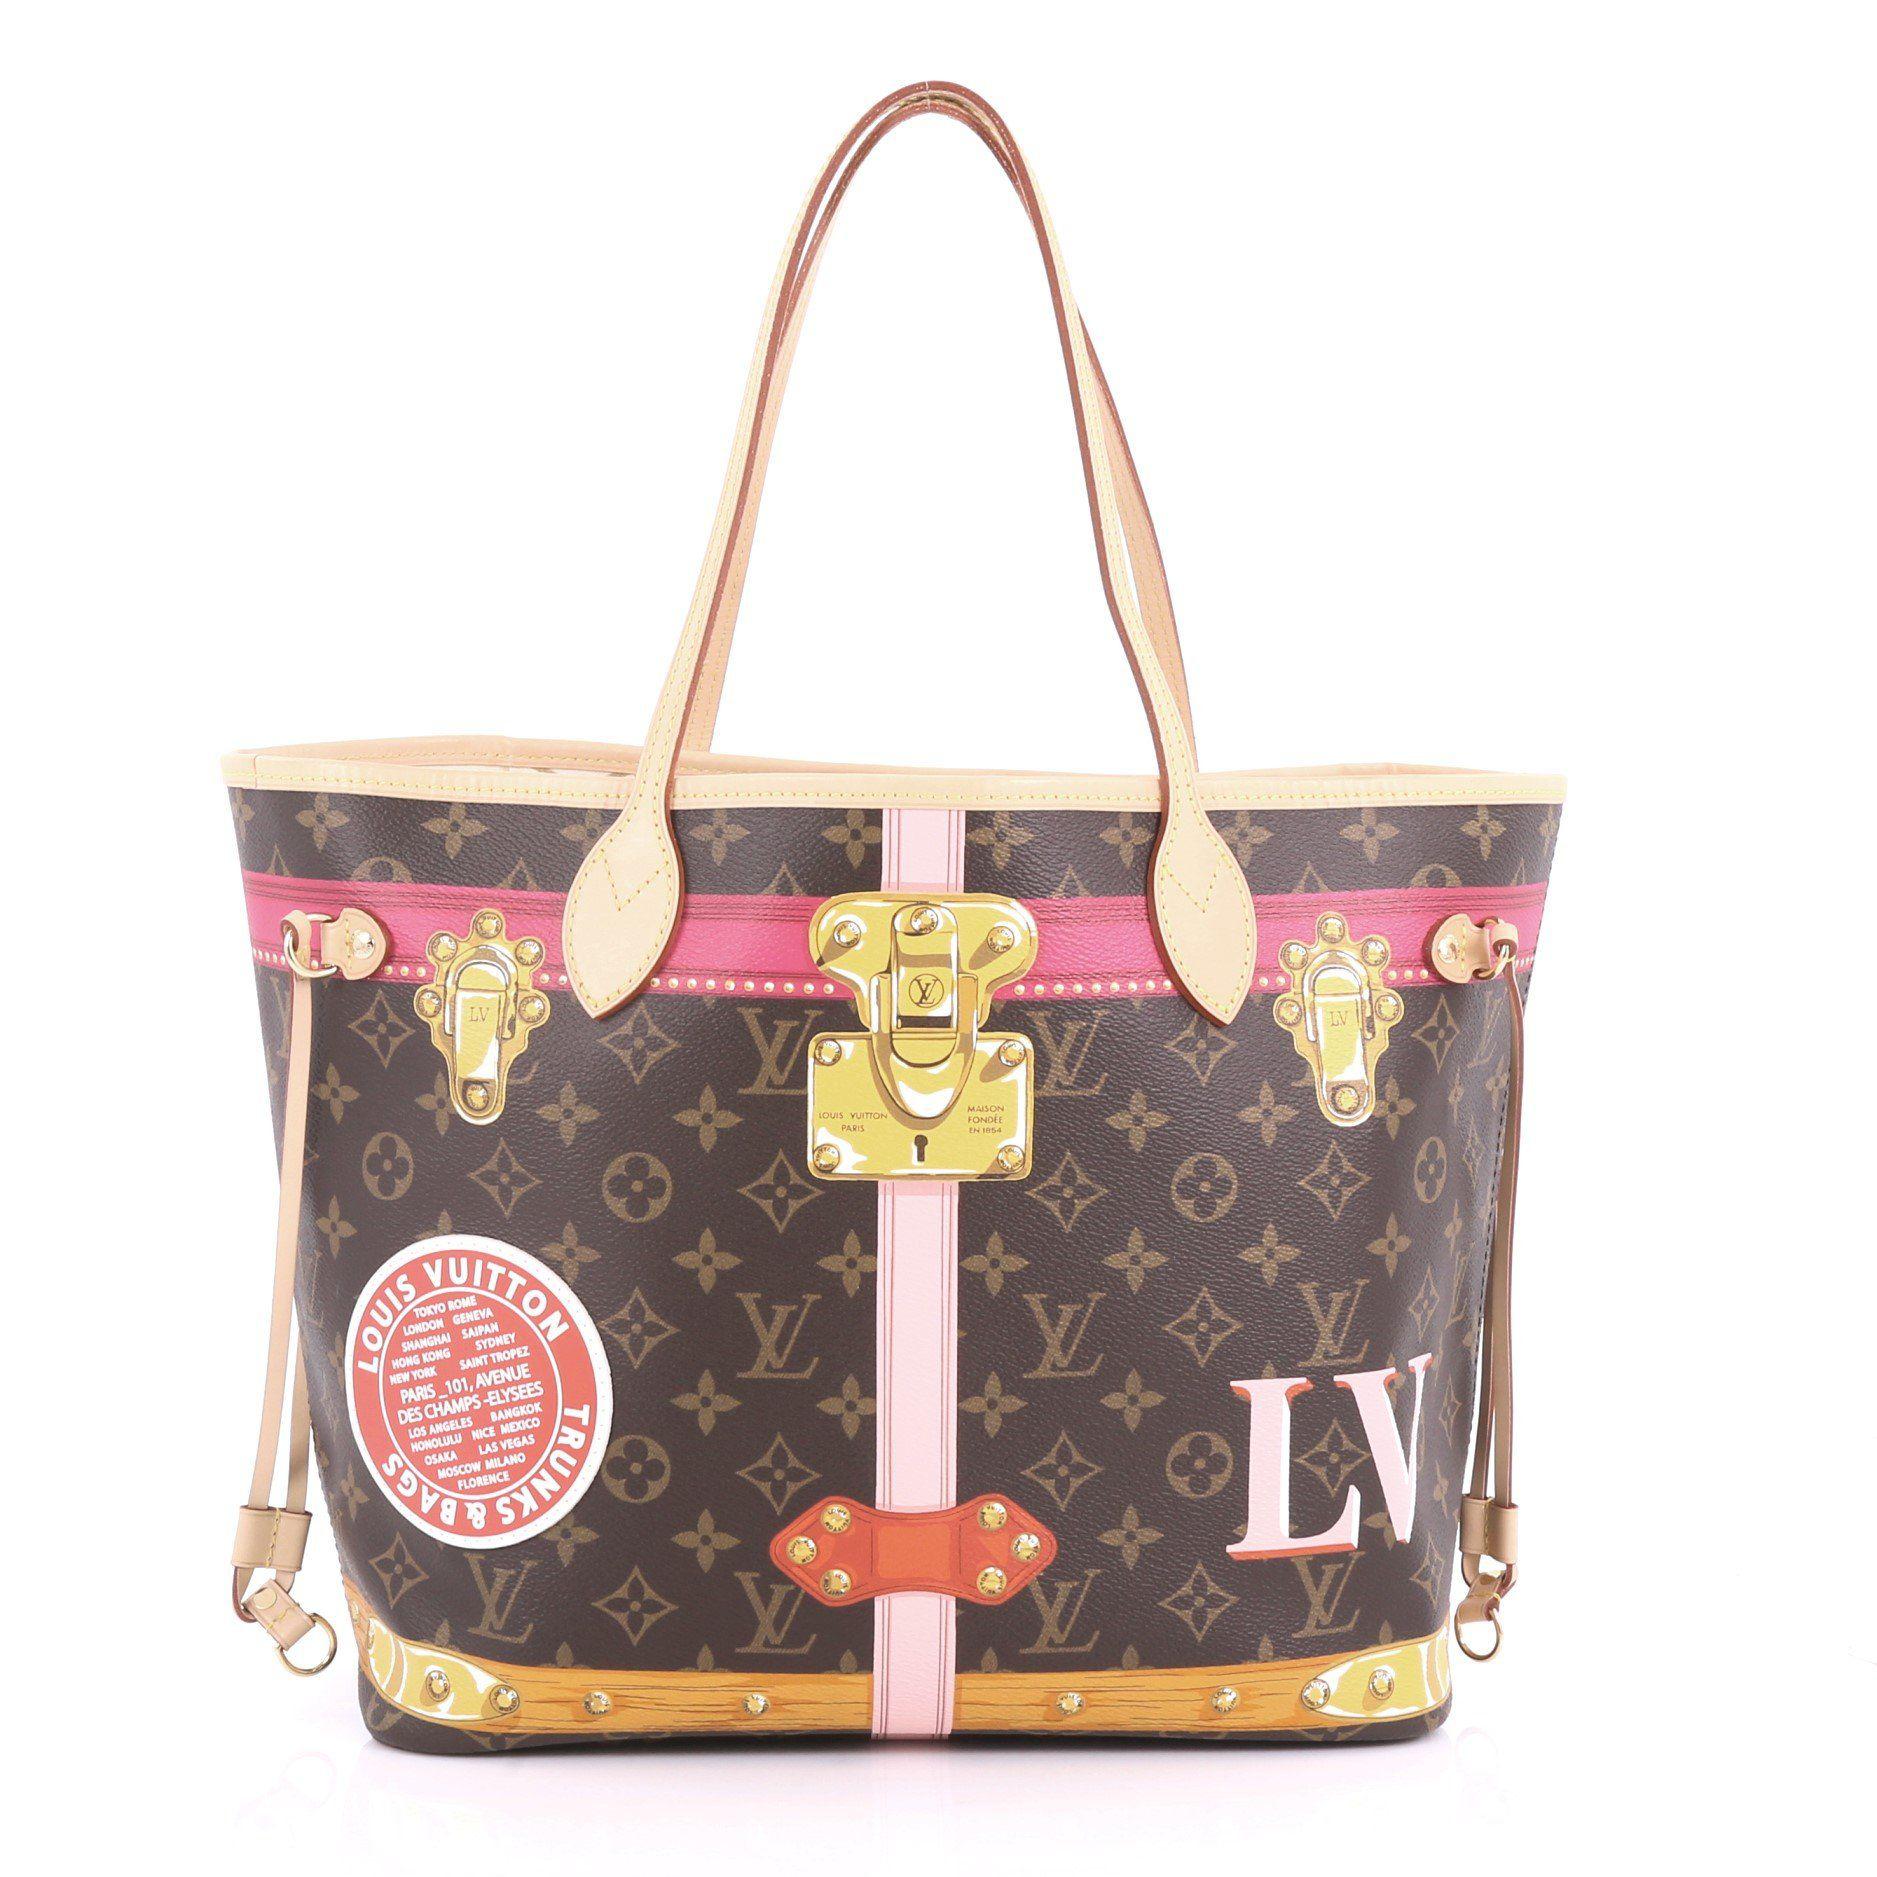 Lyst - Louis Vuitton Pre Owned Neverfull Nm Tote Limited Edition Summer Trunks Monogram Canvas Mm